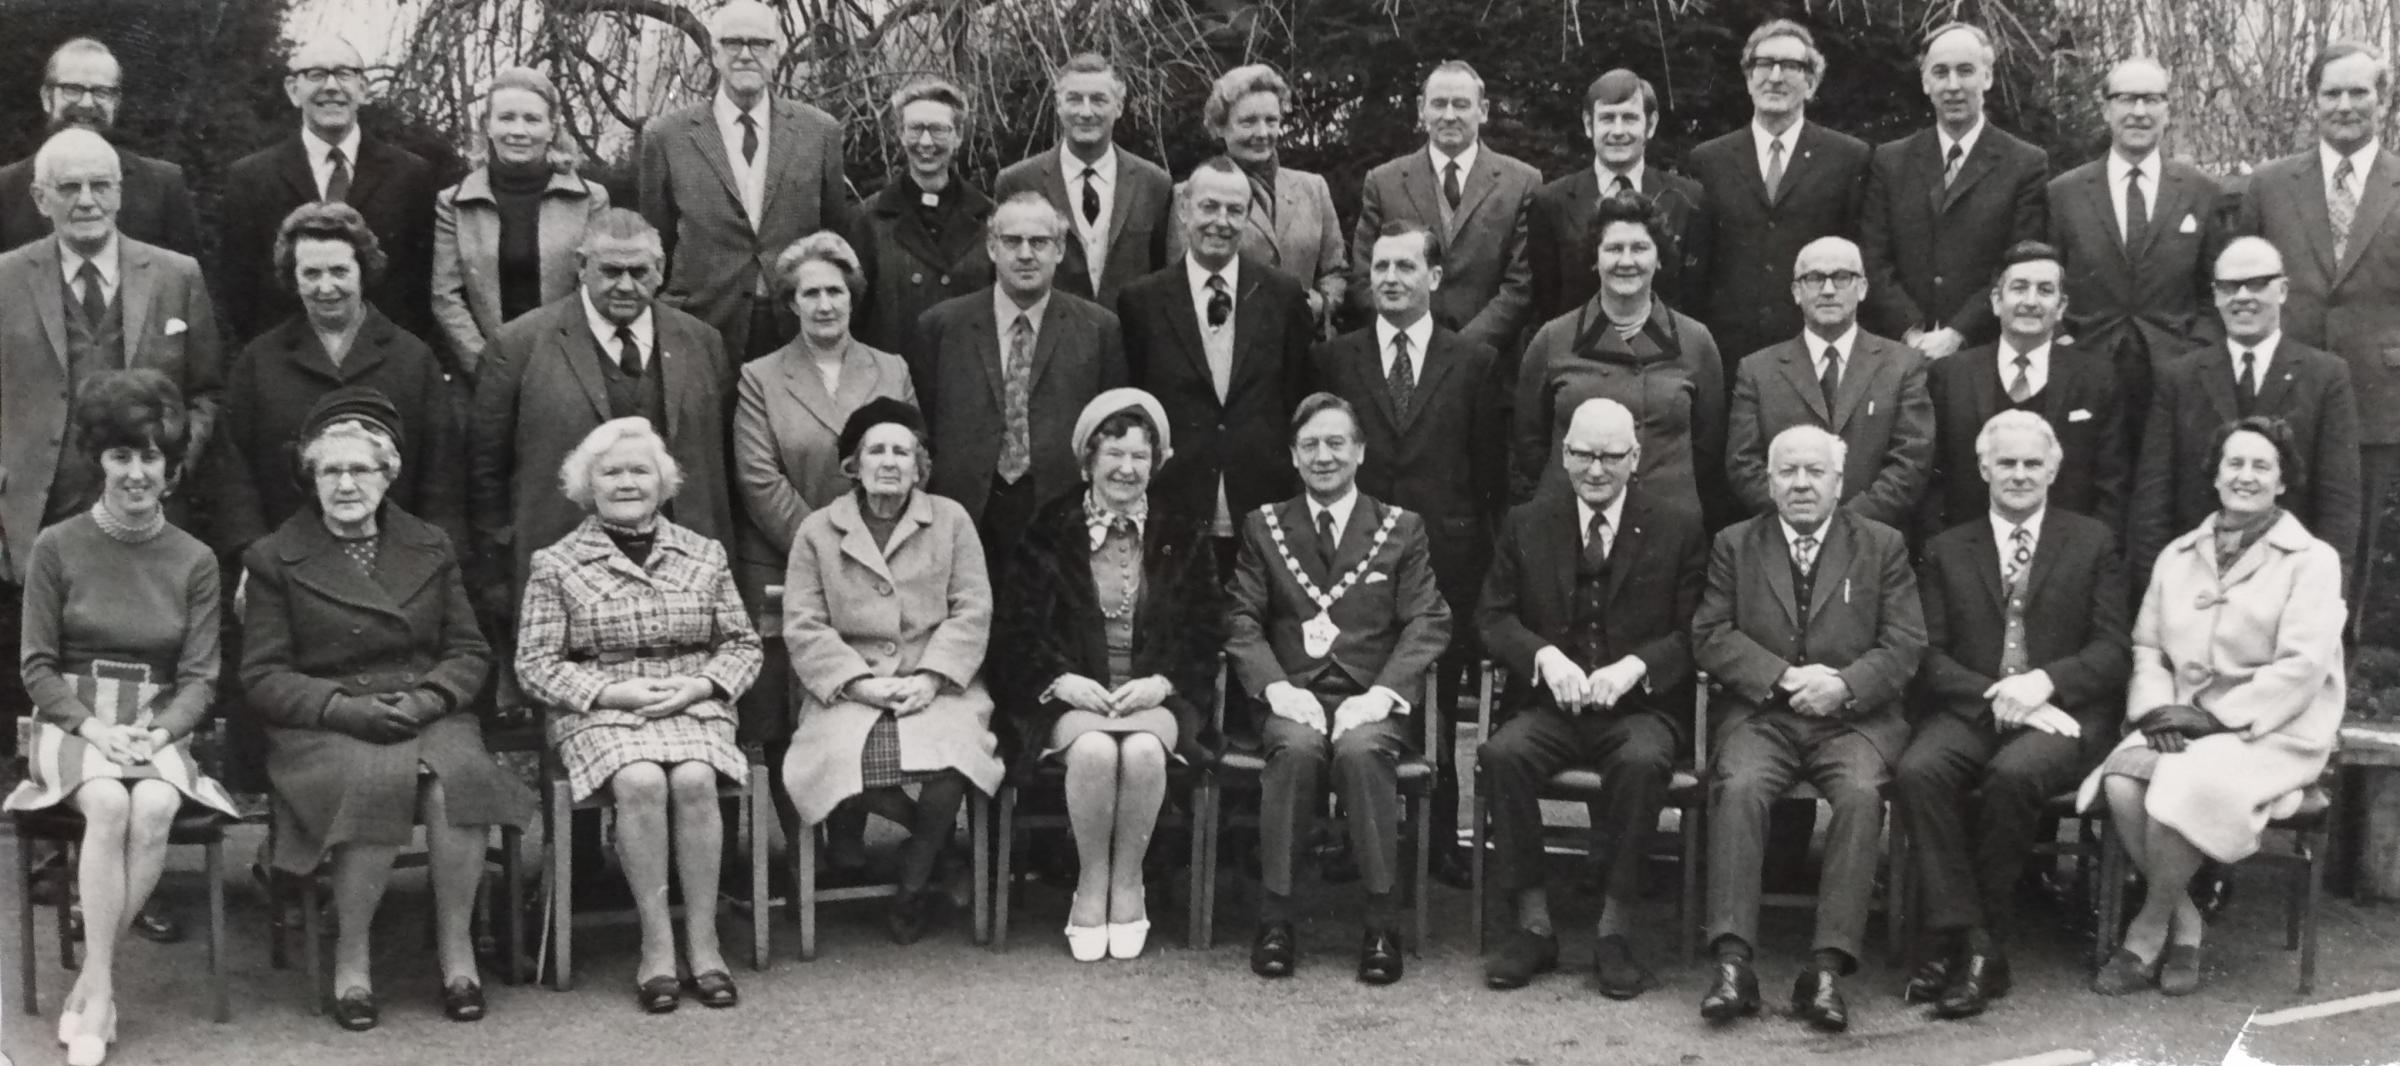 Members of Pershore Rural District Council pictured at their penultimate meeting in February 1974 shortly before local government reorganisation came into effect